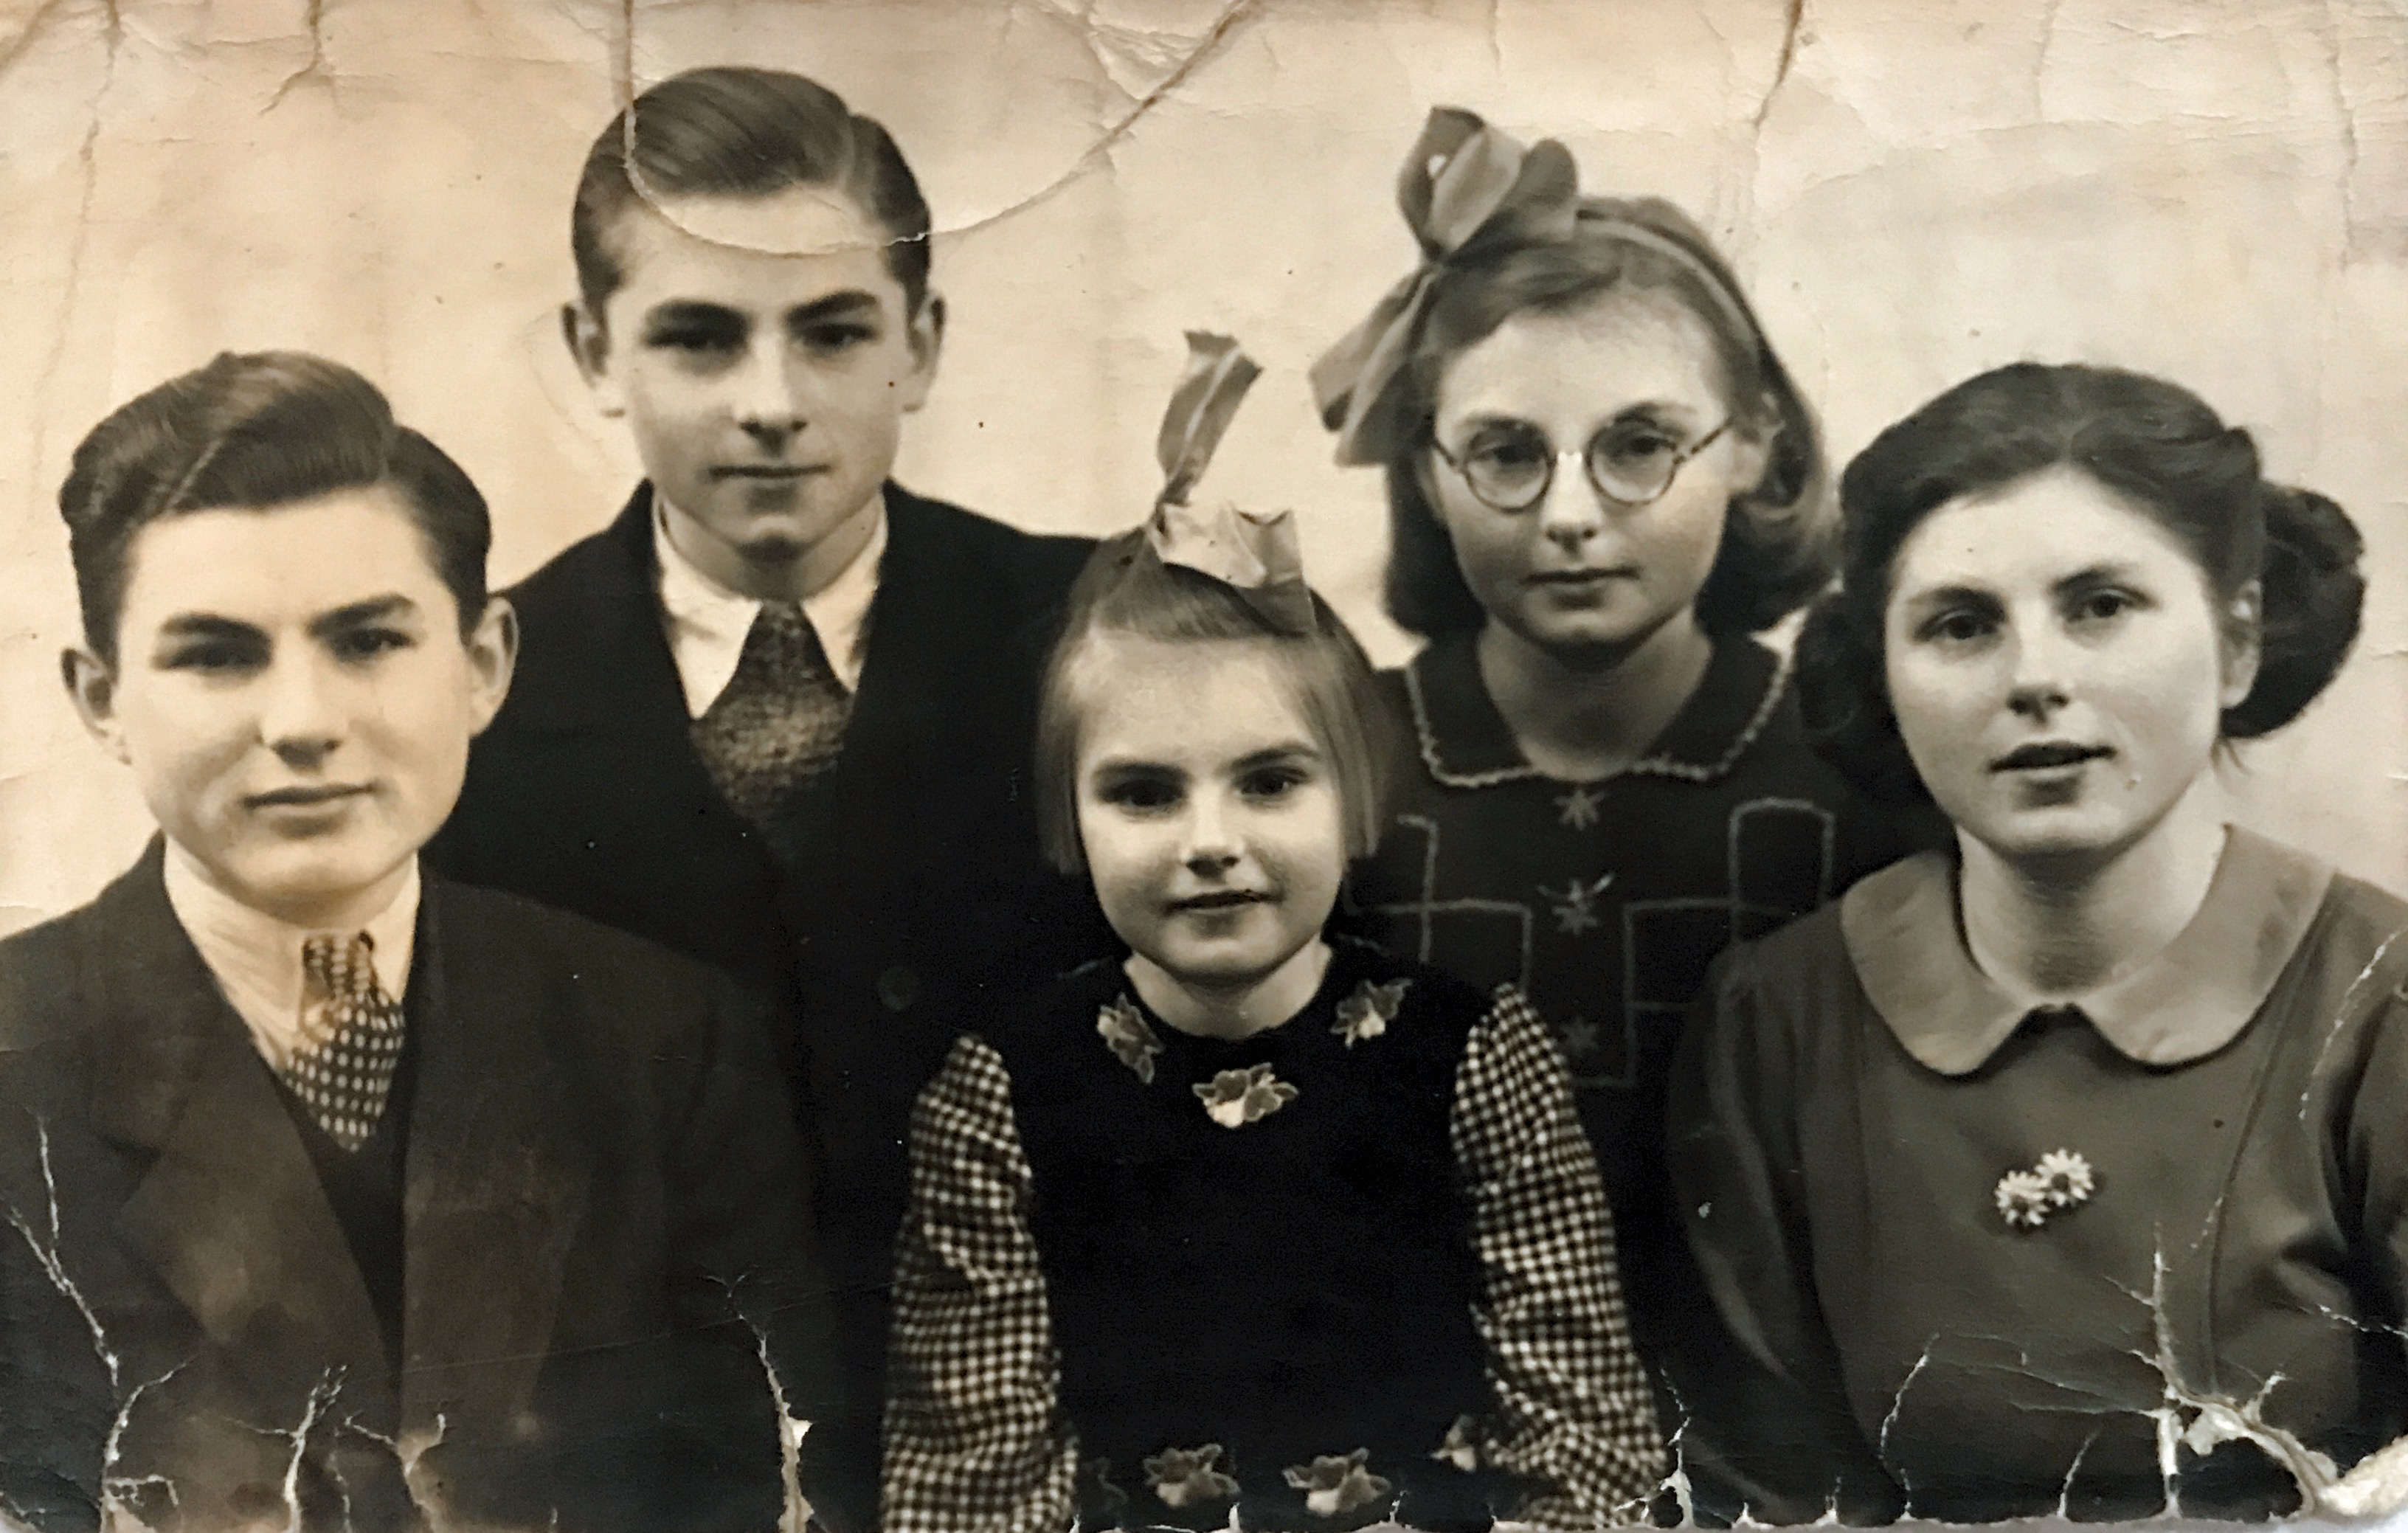 The van Schoonhoven Family: Pieter (15), Dirk (13), El (5), Jol (9), Rie (19), (1940?)
Not pictured:
Father: Dirk Jacobus van Schoonhoven
Mother: Johanna Kolk

The child second from the left and in the back row is Dirk Jacobus van Schoonhoven (named after his father) in a professional family photo with his siblings.  They lived in Rotterdam, Netherlands.   The picture was taken in 1940 just before the German occupation. It is the only picture we have so far that is of him at this age (or any childhood picture). It’s a treasure to us!  
Months after this picture was taken their mother Johanna Kolk van Schoonhoven died (which saddened Dirk tremendously) and the invasion disrupted their lives.
